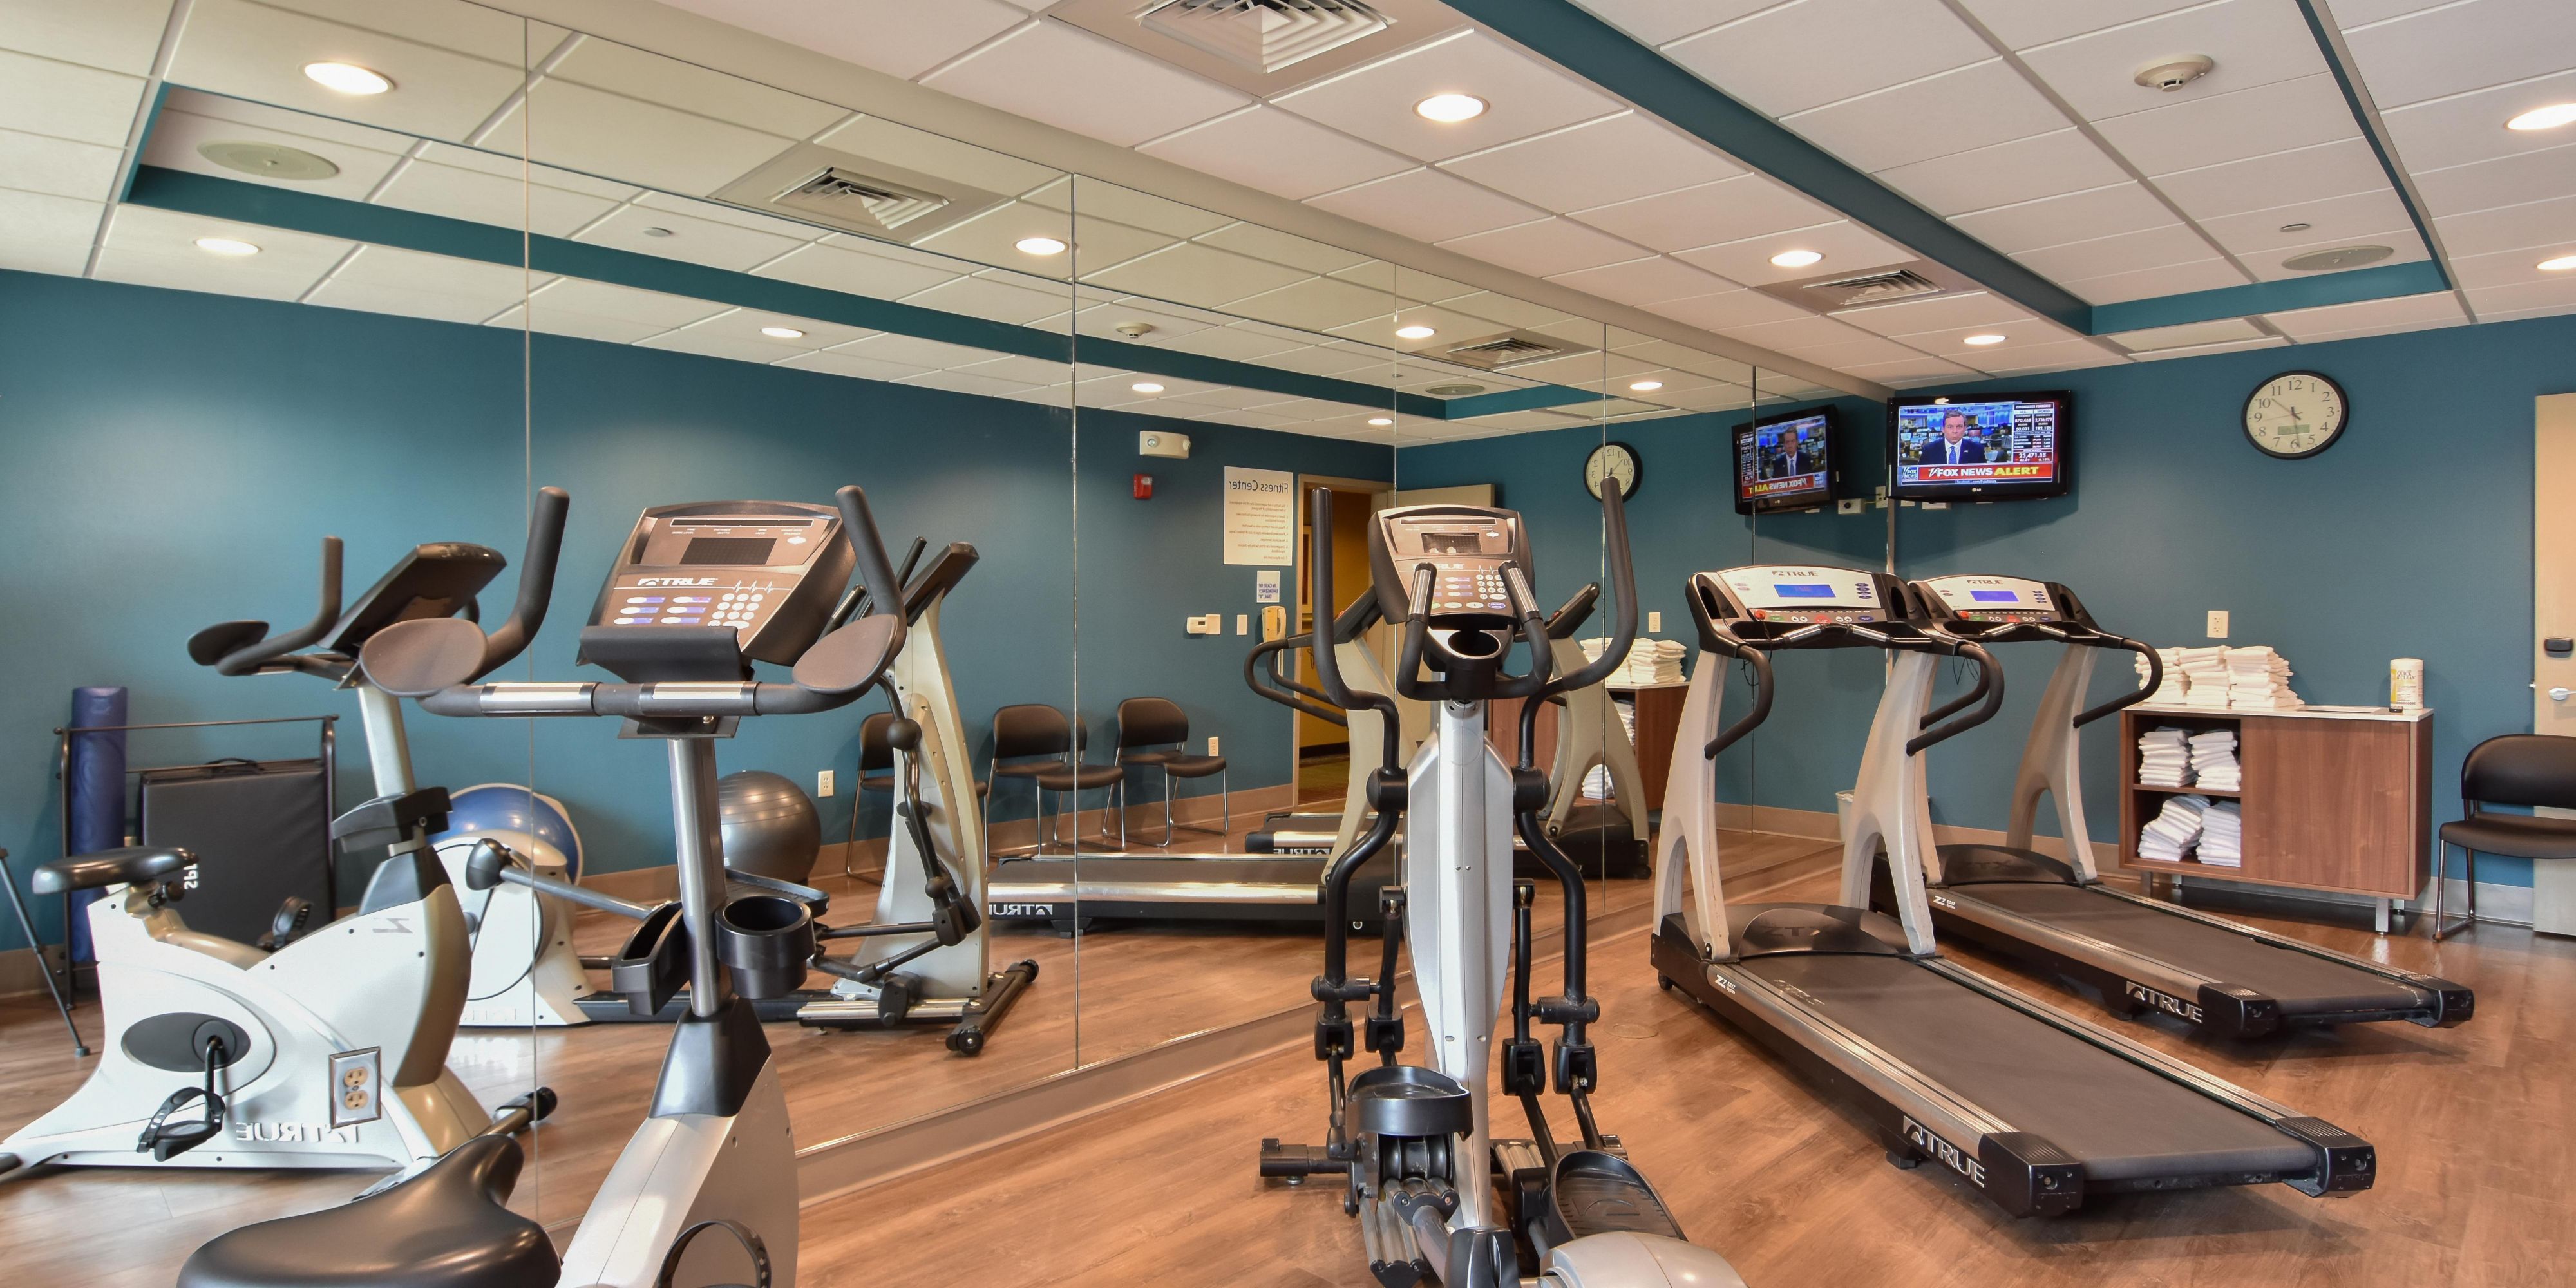 Fit travelers, don't sweat it. We've got you covered! You're welcome to go for a swim in our heated indoor pool or enjoy an invigorating workout in our complimentary Fitness Center. You'll find treadmills, elliptical machines, free weights or a stationary bicycle available just for you! "Stay Smart" and fit when you stay with us!
